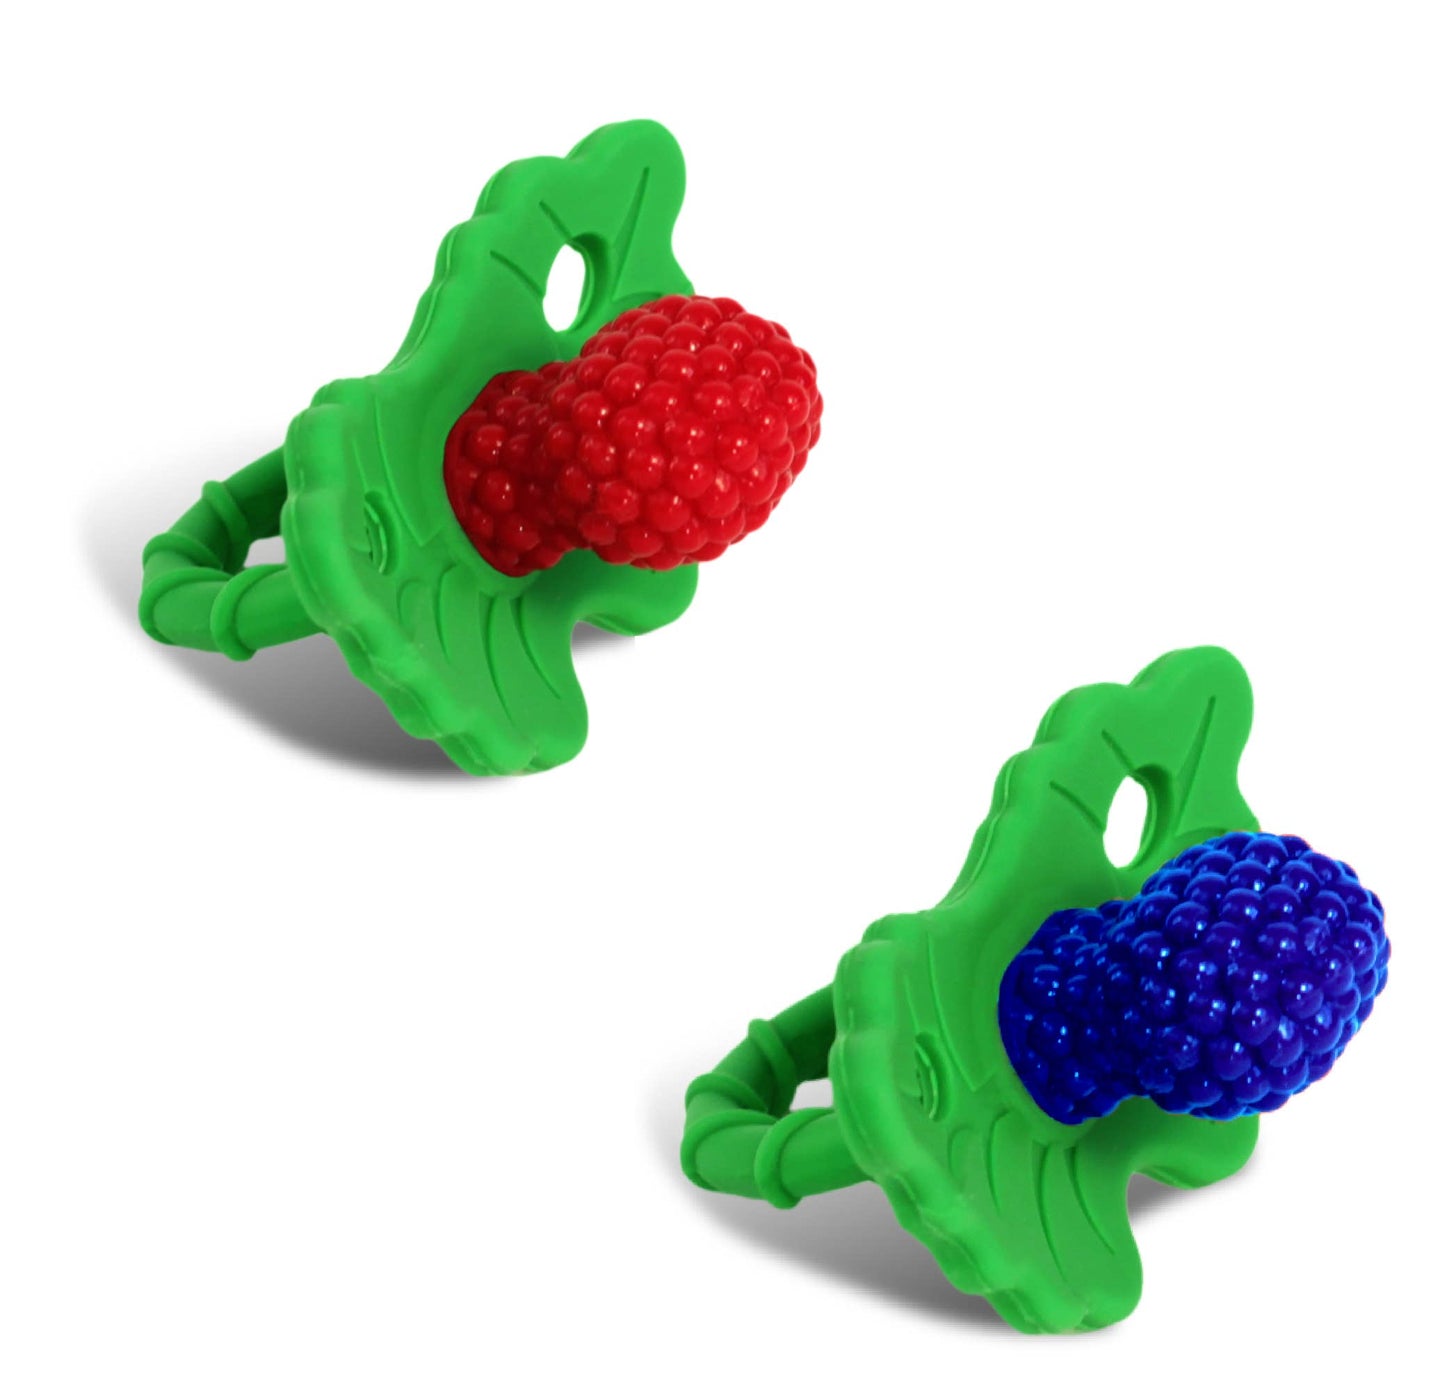 RaZberry Silicone Teether 2PK - Red & Blue